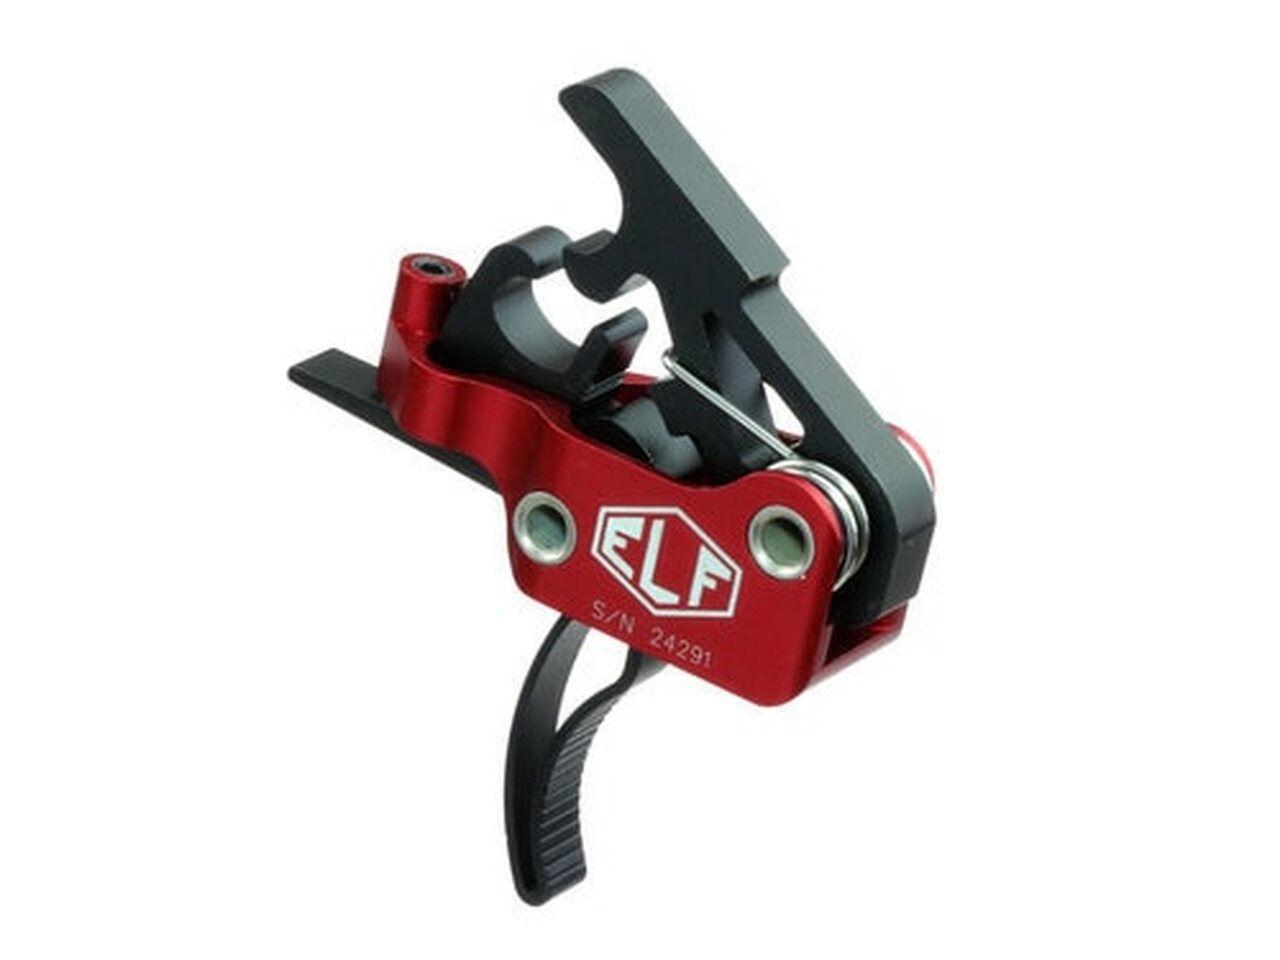 Image of Elftmann Tactical 3-Gun Trigger, Curved, Drop-In, 2.75-4lbs, Black/Red